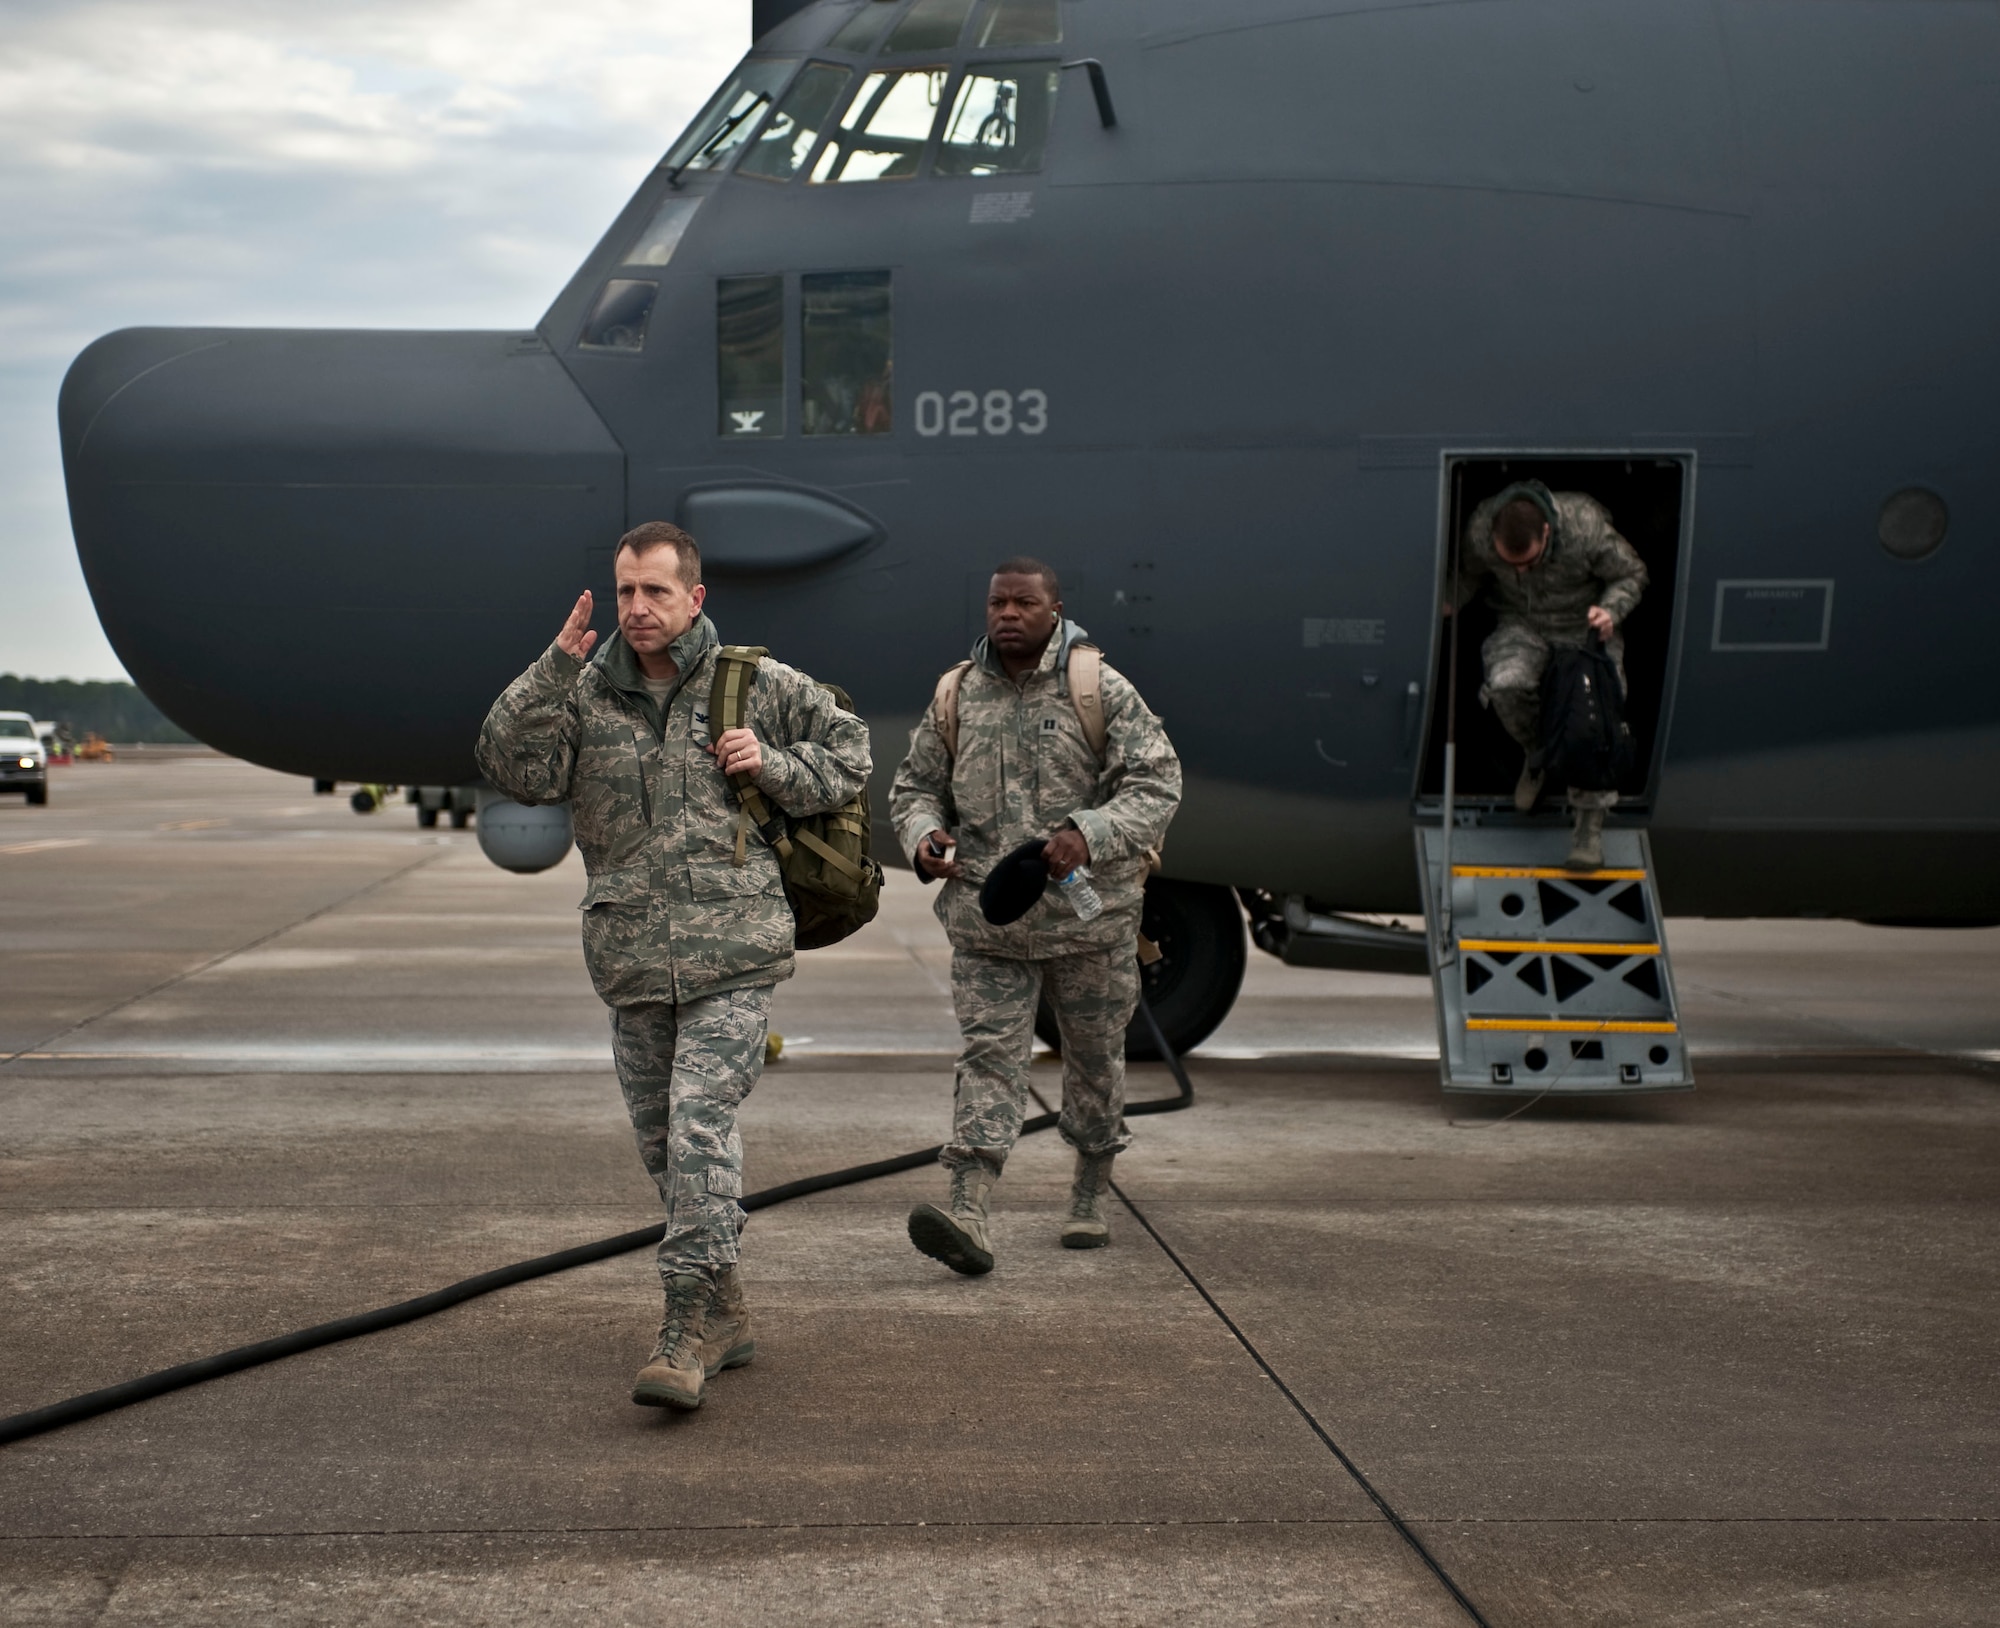 Col. Jim Slife, commander of 1st Special Operations Wing, disembarks from a Combat Talon II on the flightline at Hurlburt Field, Fla., Feb. 21, 2012. Capt. Myron Chivis, commander's executive of 1st SOW, follows the commander to his next location. (U.S. Air Force photo / Airman 1st Class Hayden Hyatt)